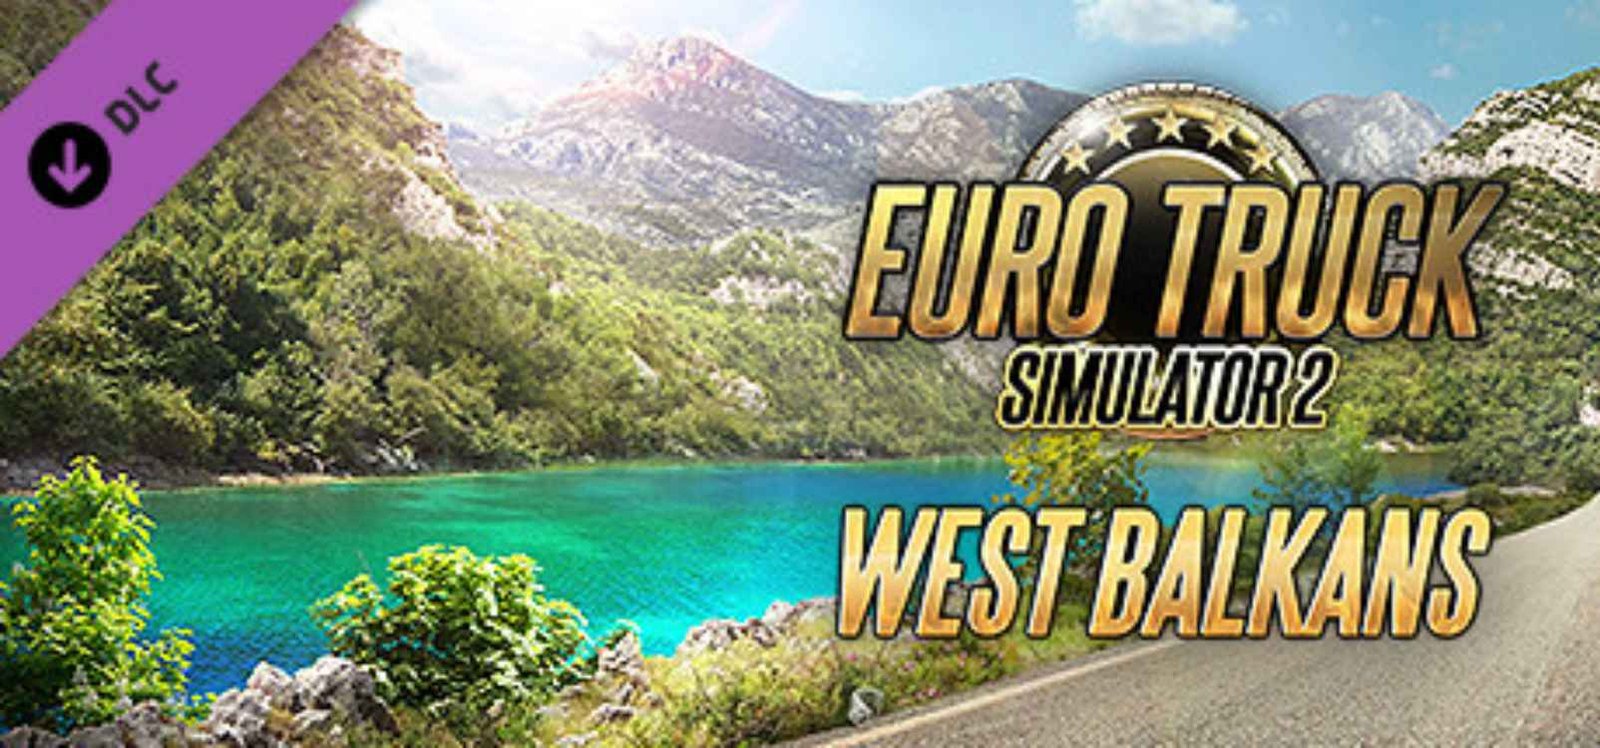 Euro Truck Simulator 2 The Game Filesystem Failed To Initialize Aborting Now Error: Fixes & Workarounds